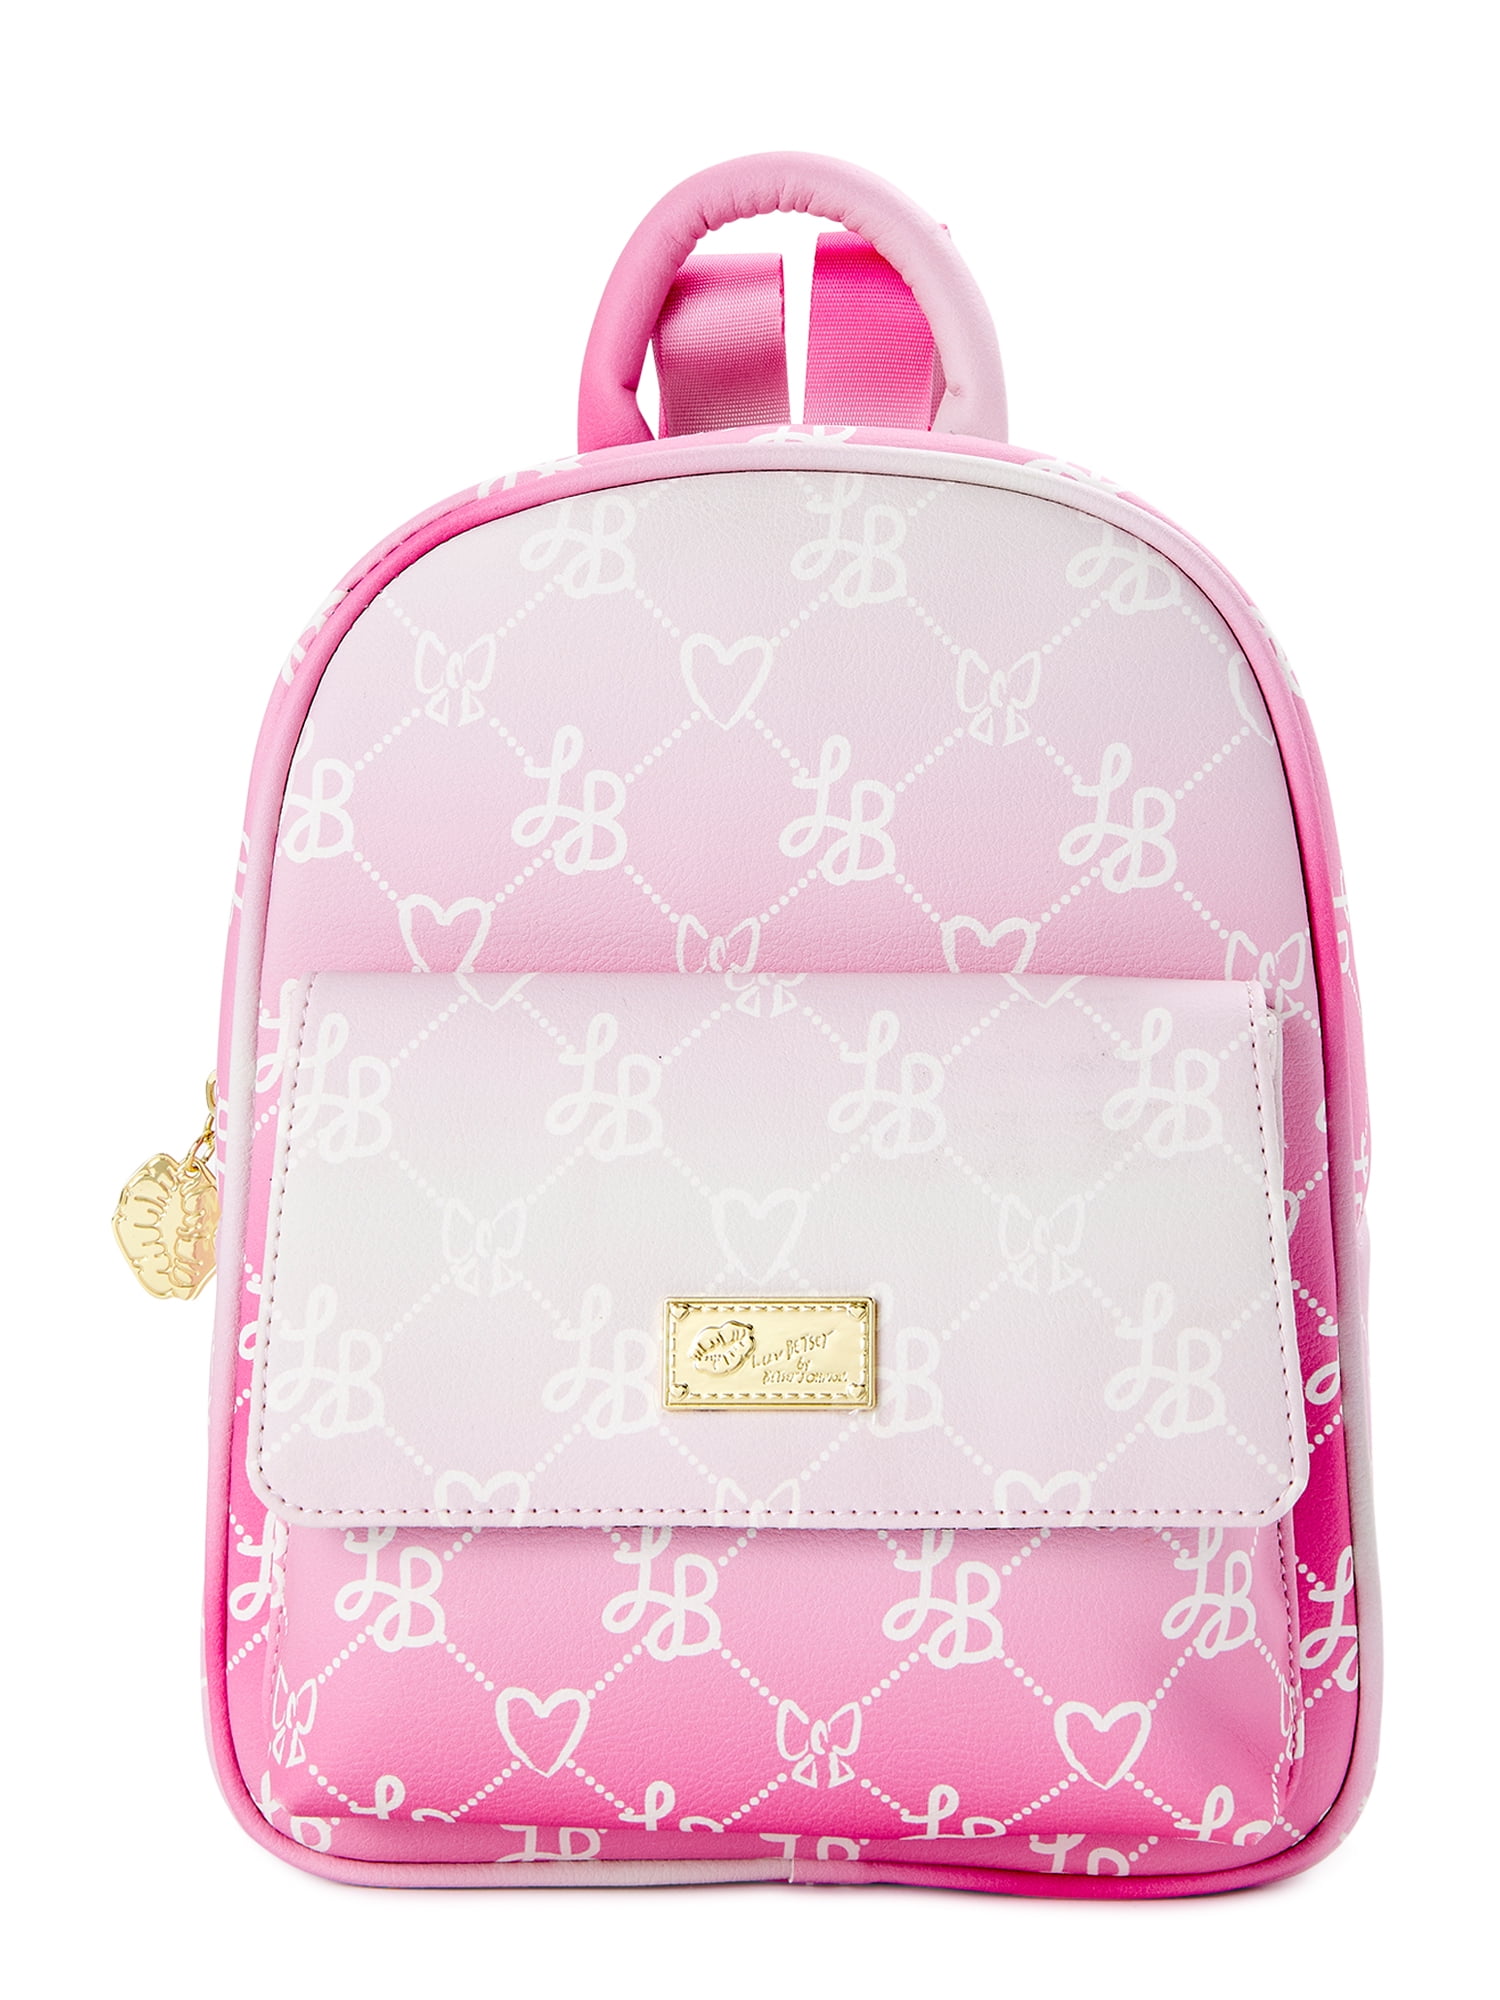 Luv Betsey by Betsey Johnson Women's Pink and White Backpack with Front Pocket, Size: One Size